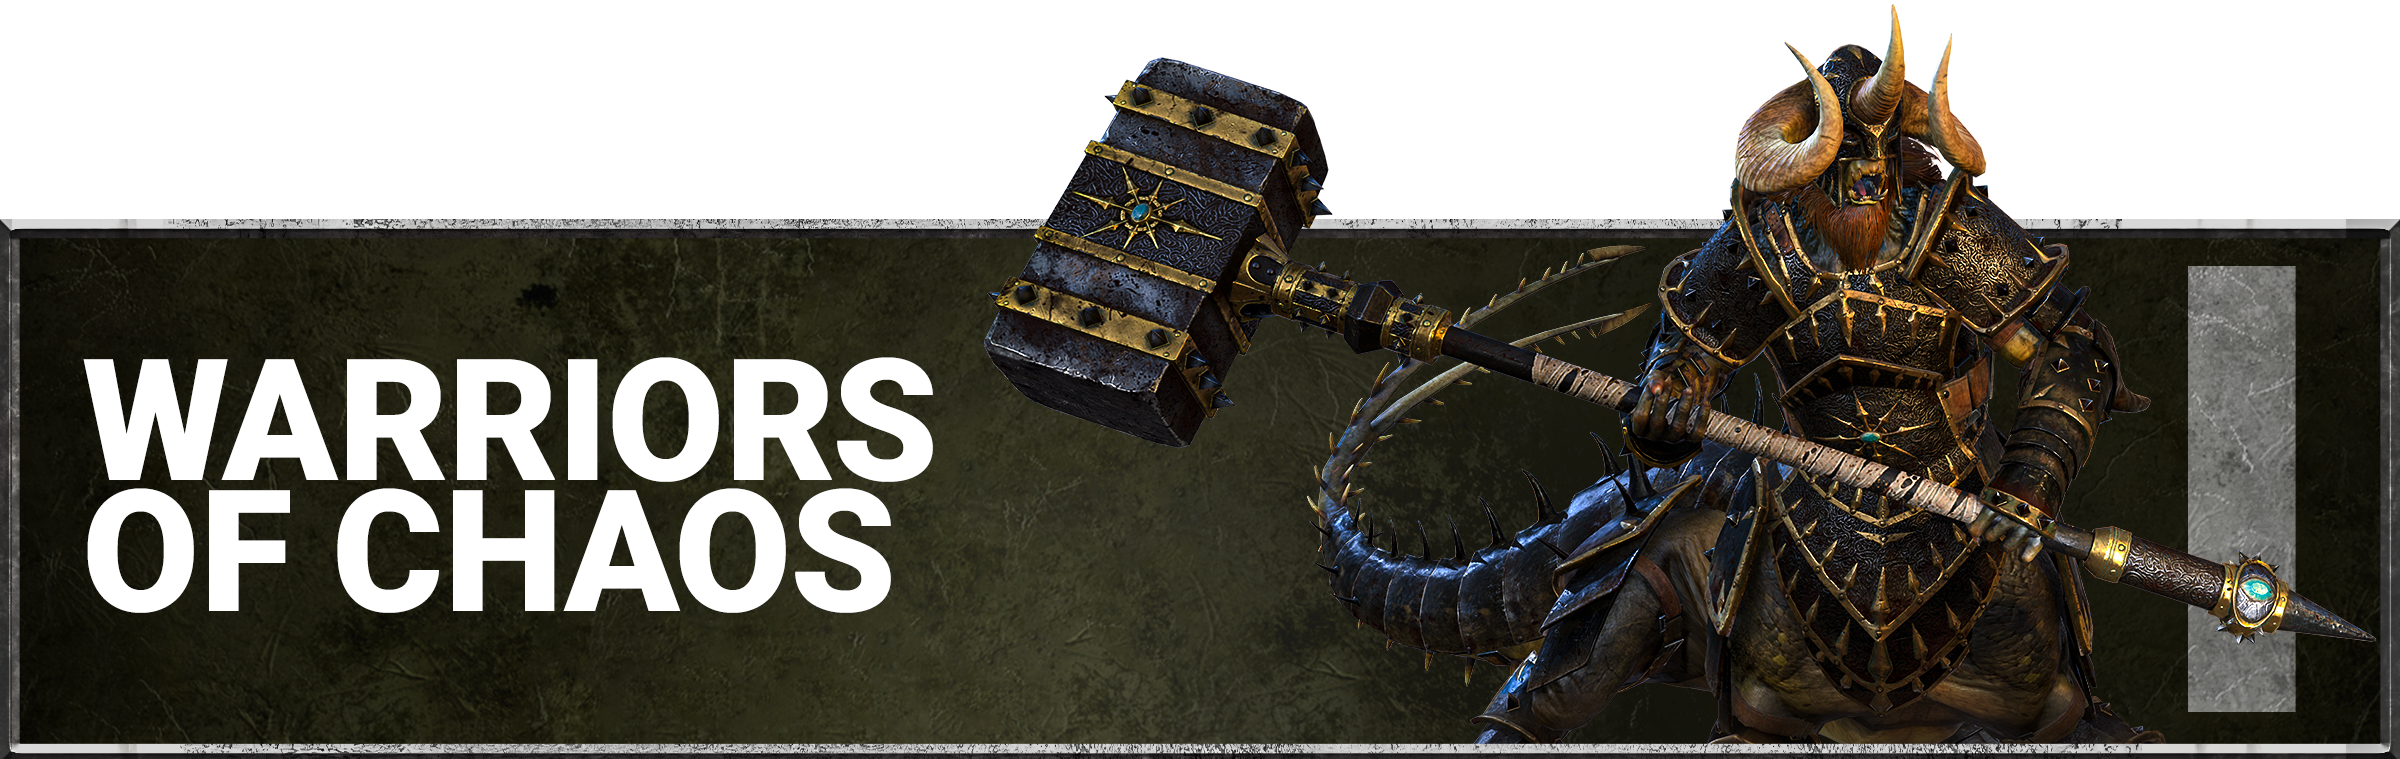 Race and balance changes for the Warriors of Chaos race and factions, available from Total War: WARHAMMER.